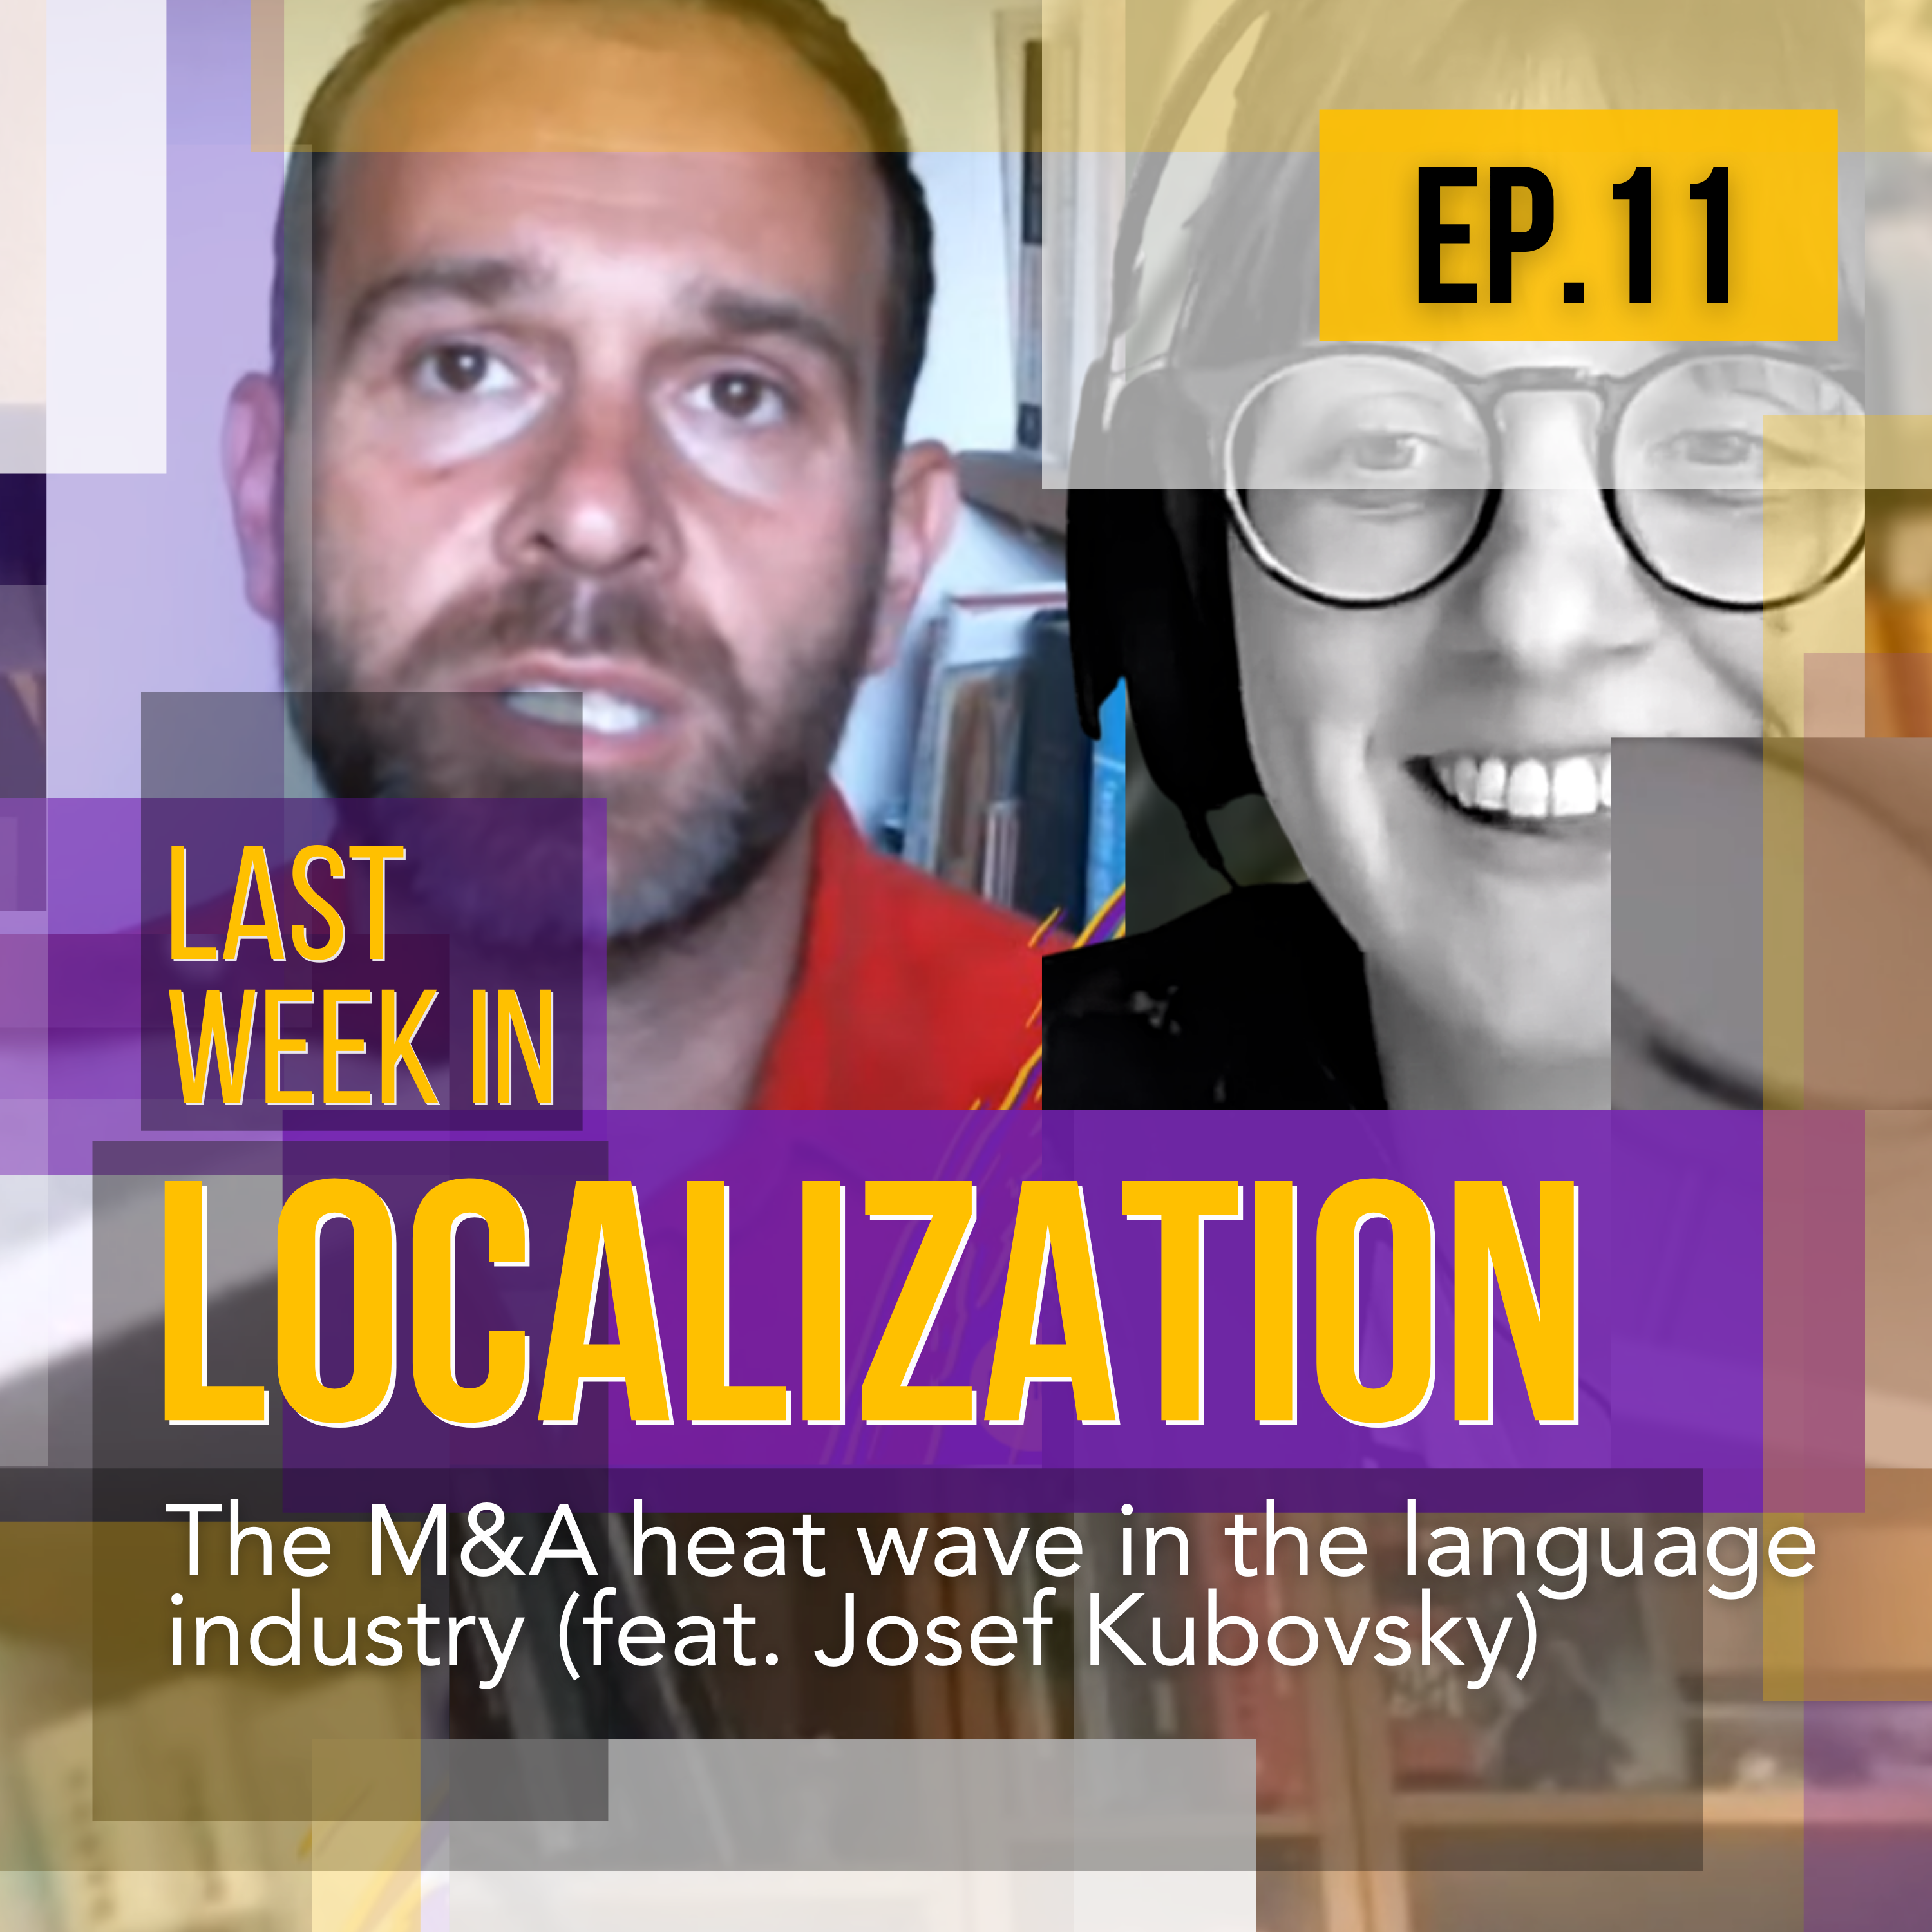 The M&A heat wave in the language industry (feat. Josef Kubovsky)